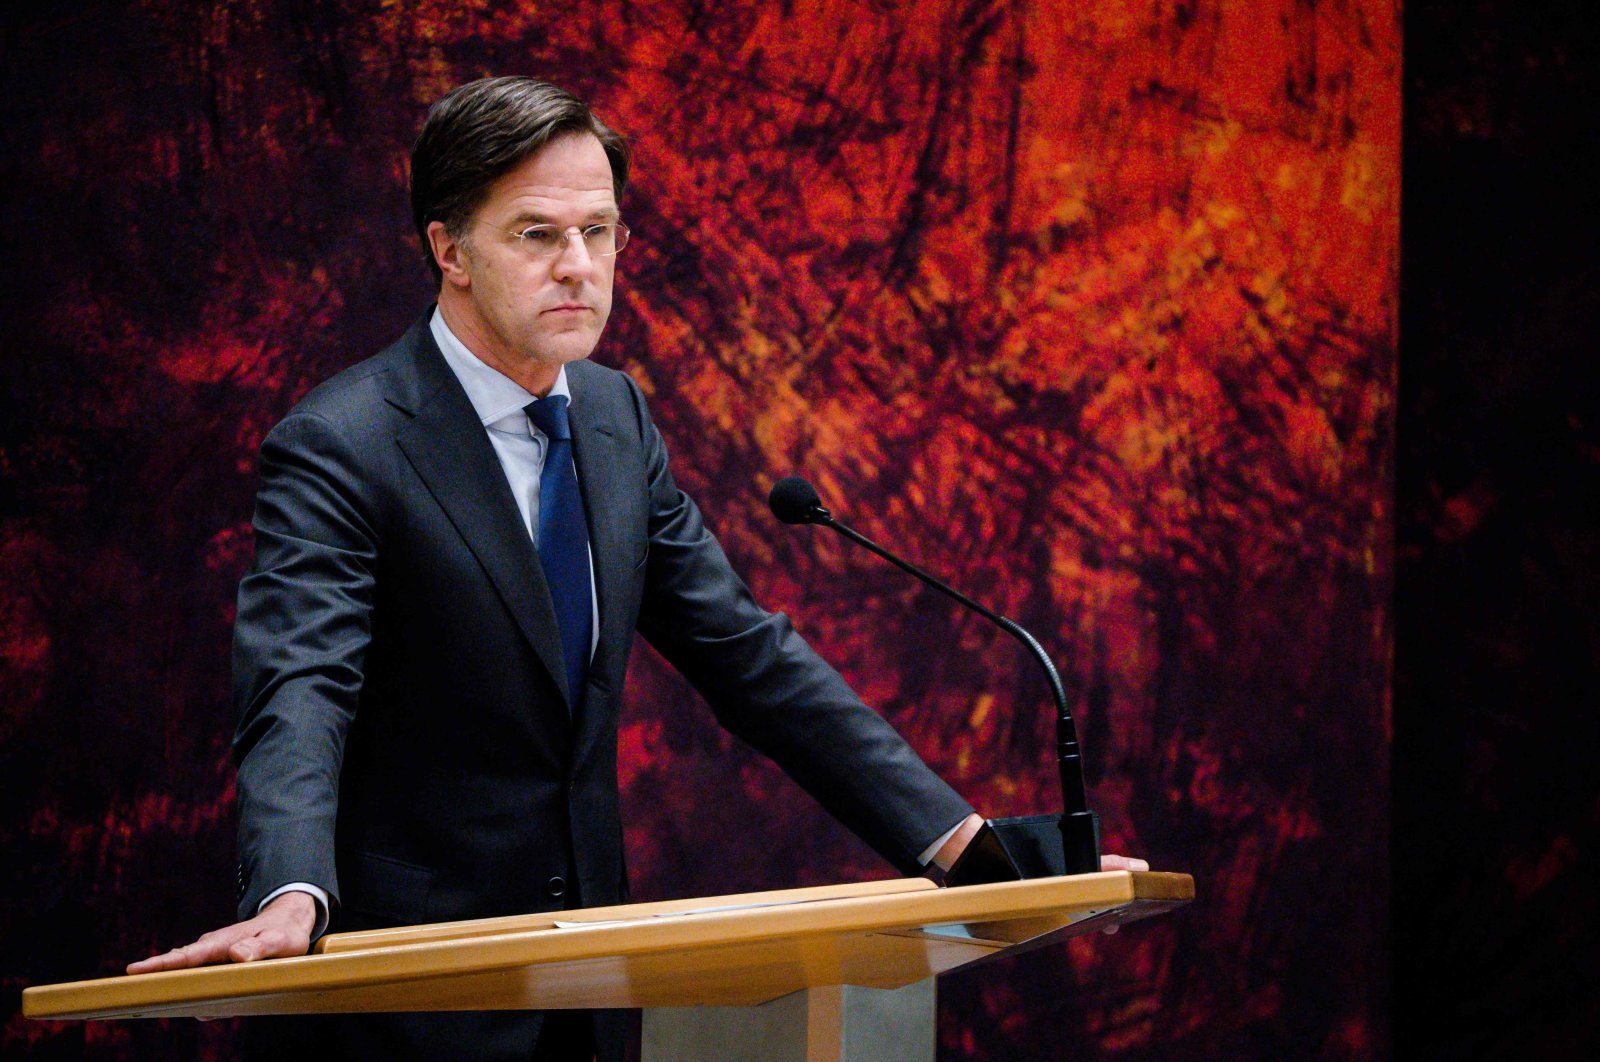 Outgoing Prime Minister and VVD Member of Parliament Mark Rutte stands in the House of Representatives, during a debate about the failed formation reconnaissance, The Hague, Netherlands, April 2, 2021. (AFP Photo)